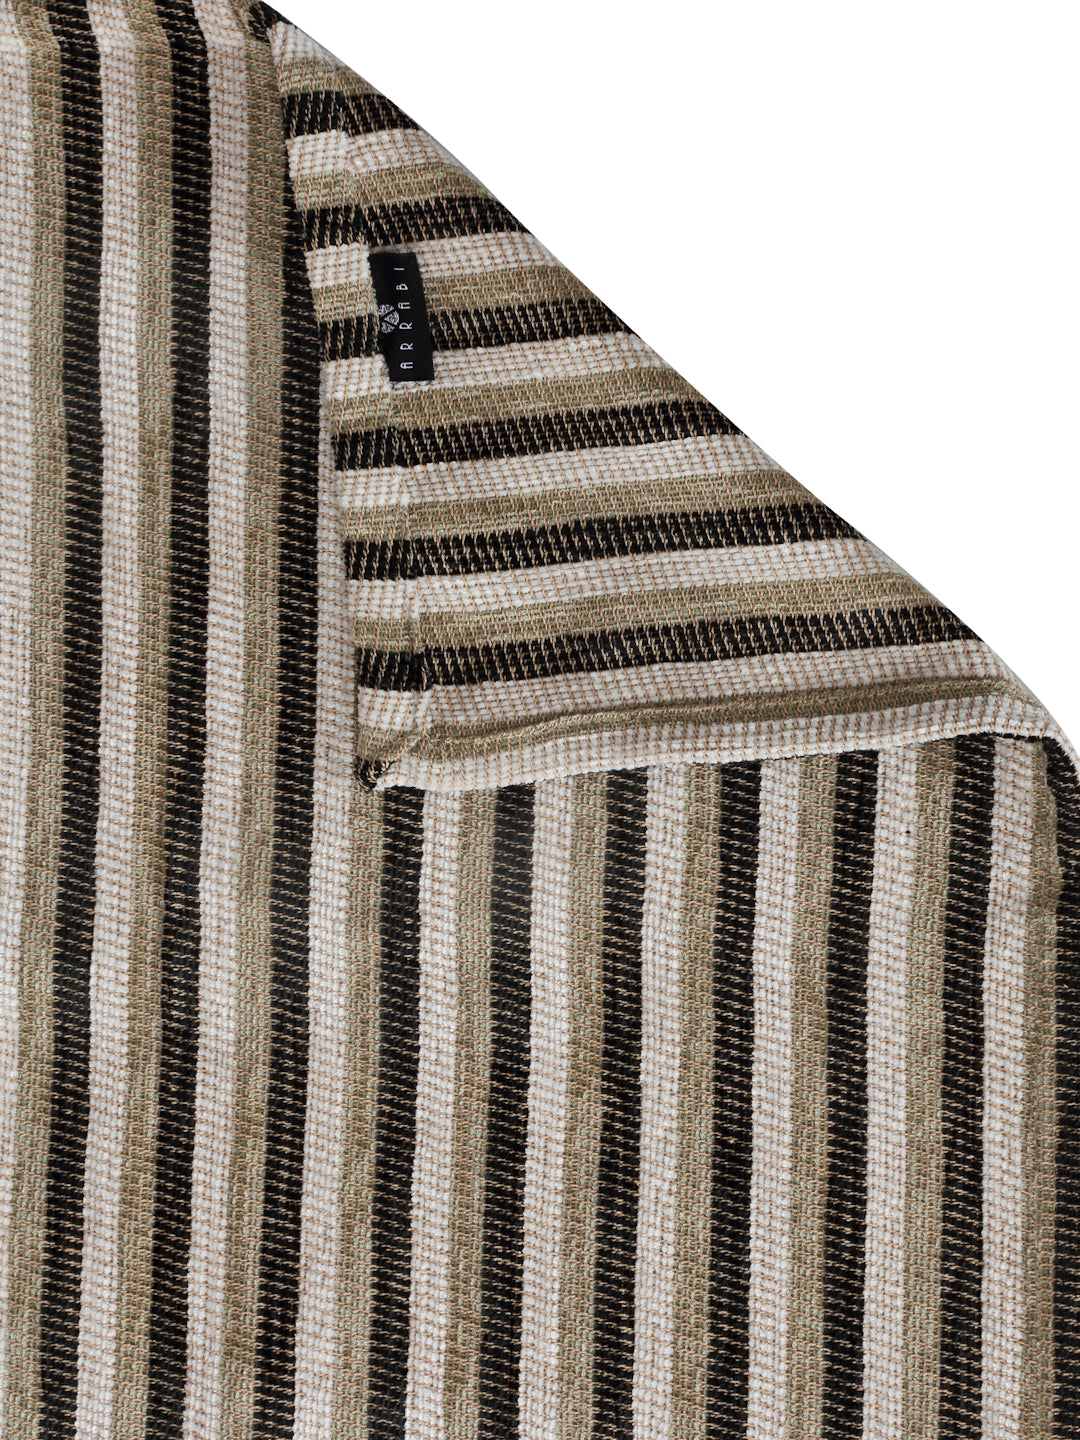 Arrabi Beige Stripes Handwoven Cotton King Size Bedsheet with 2 Pillow Covers (260 X 230 cm)